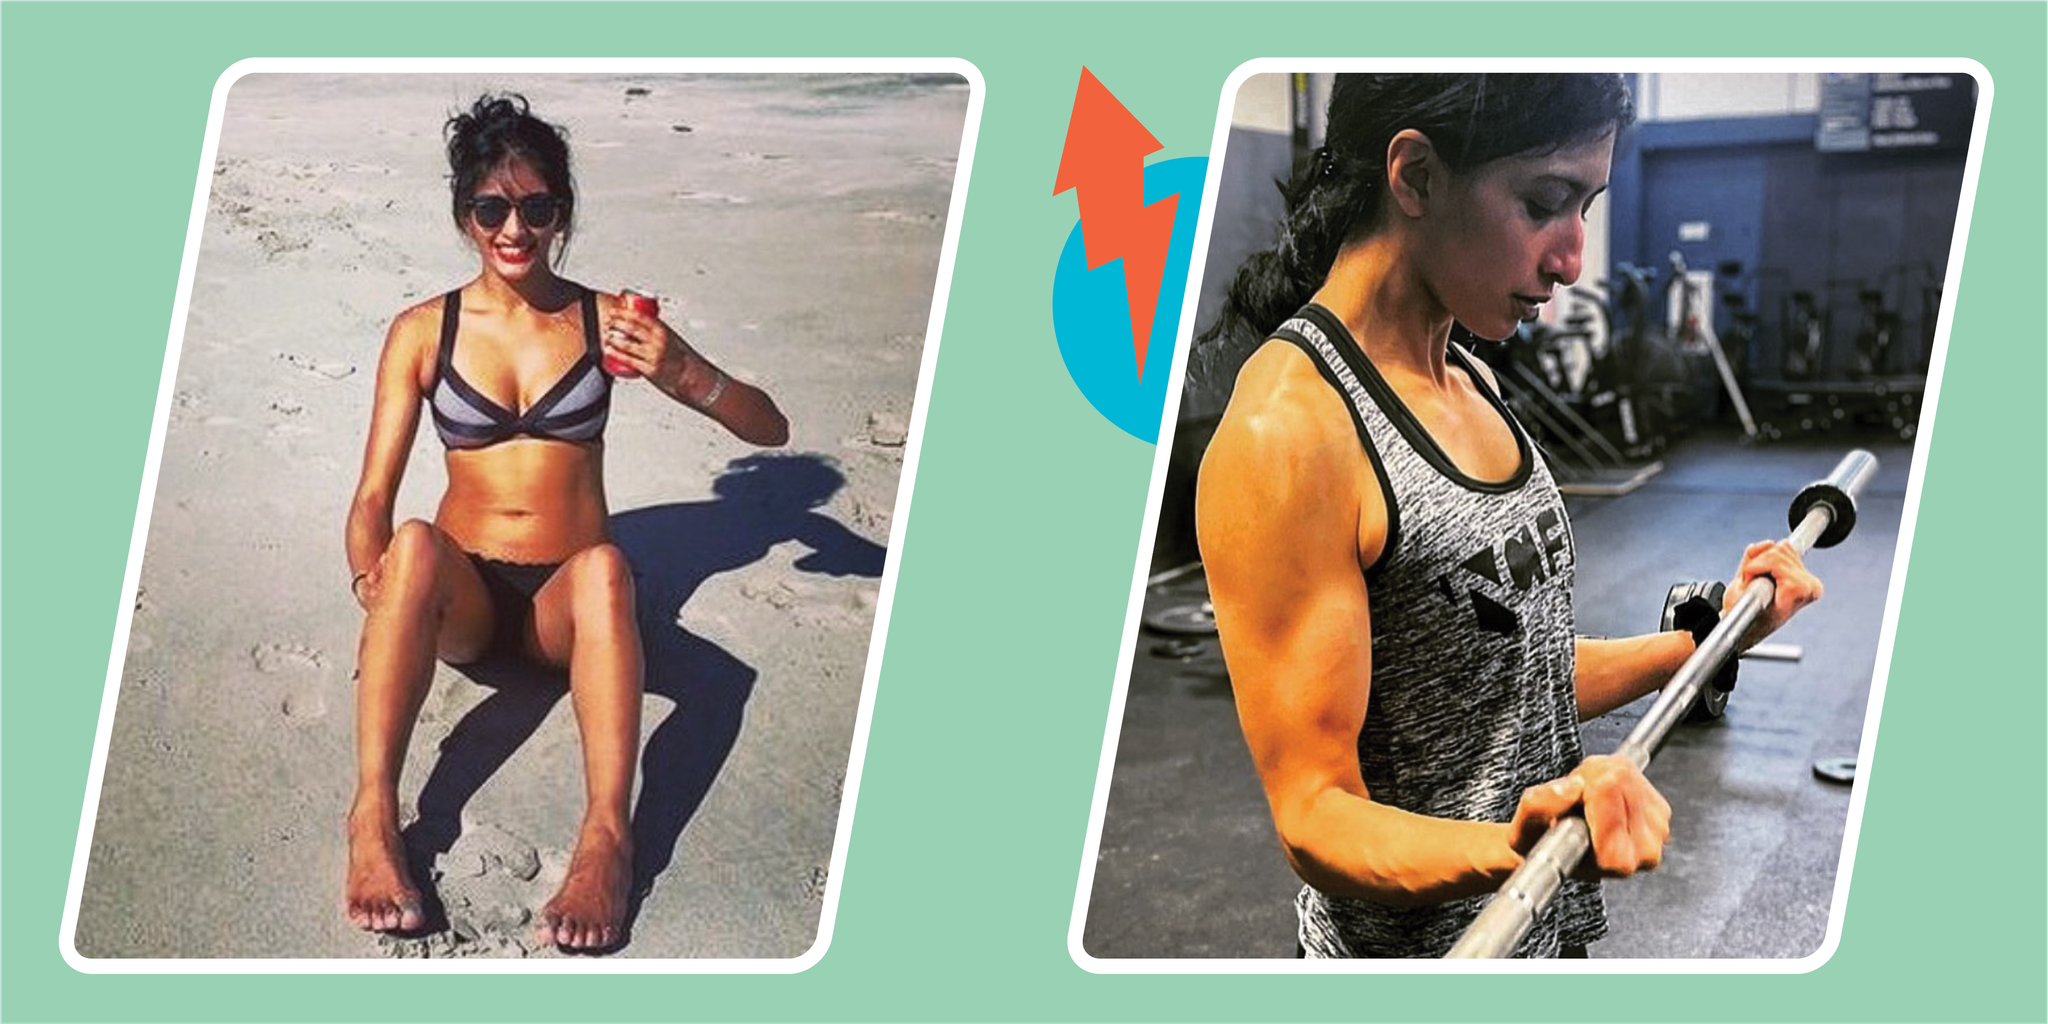 Weightlifting, Muay Thai Helped This Woman Gain Strength